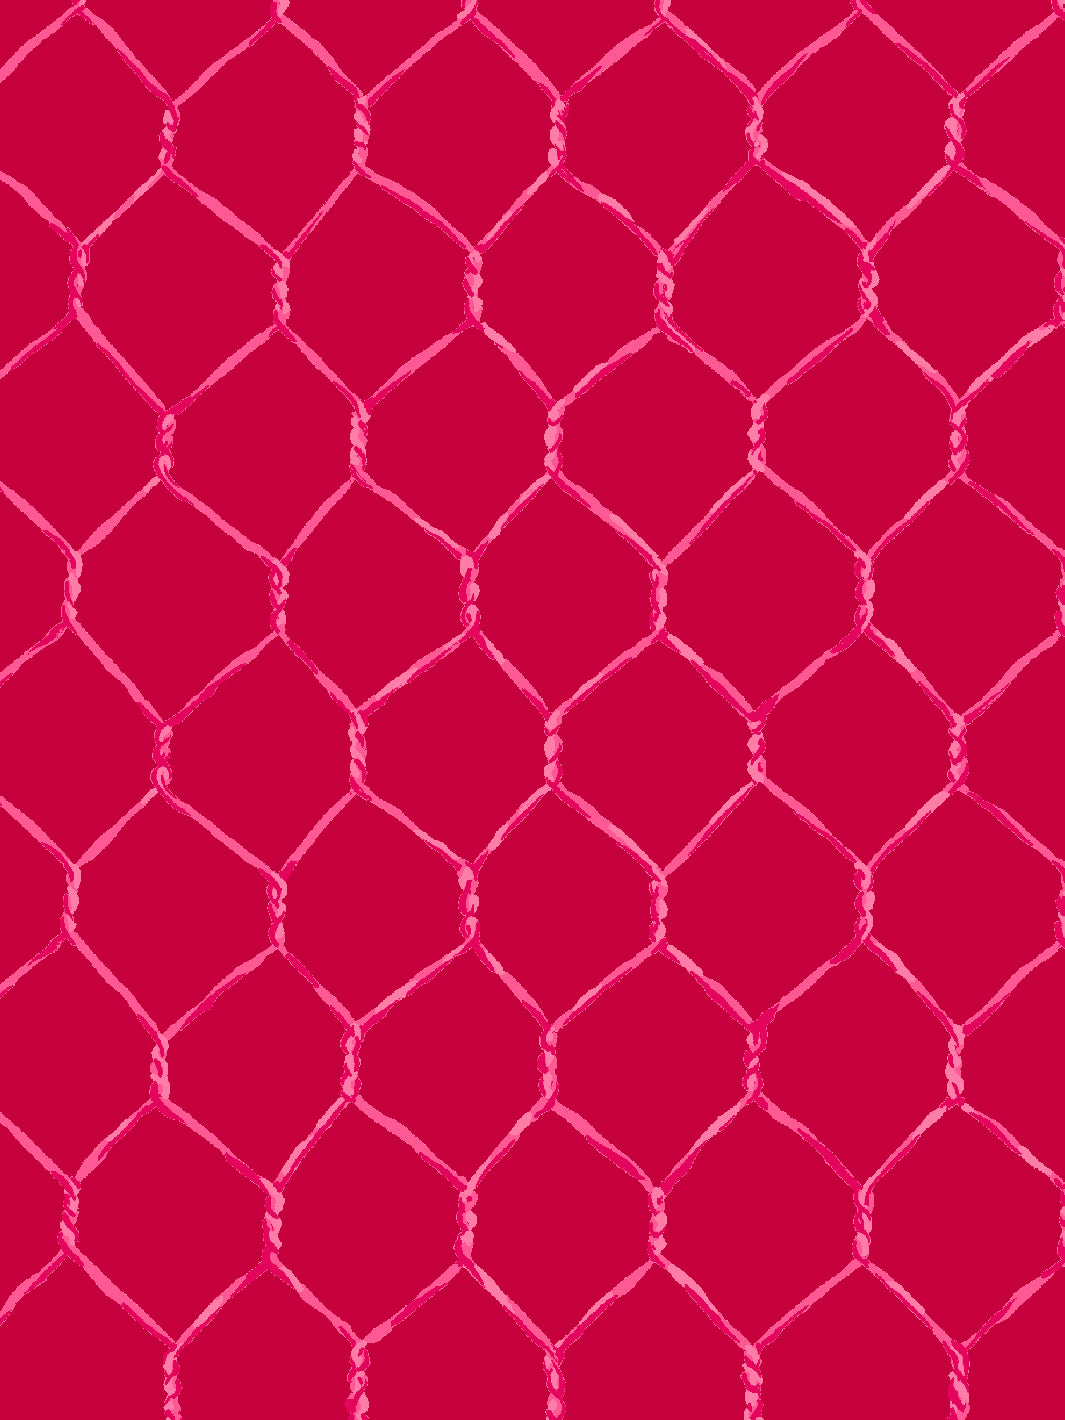 'Evelyn's Chicken Wire' Wallpaper by Sarah Jessica Parker - Pink on Geranium